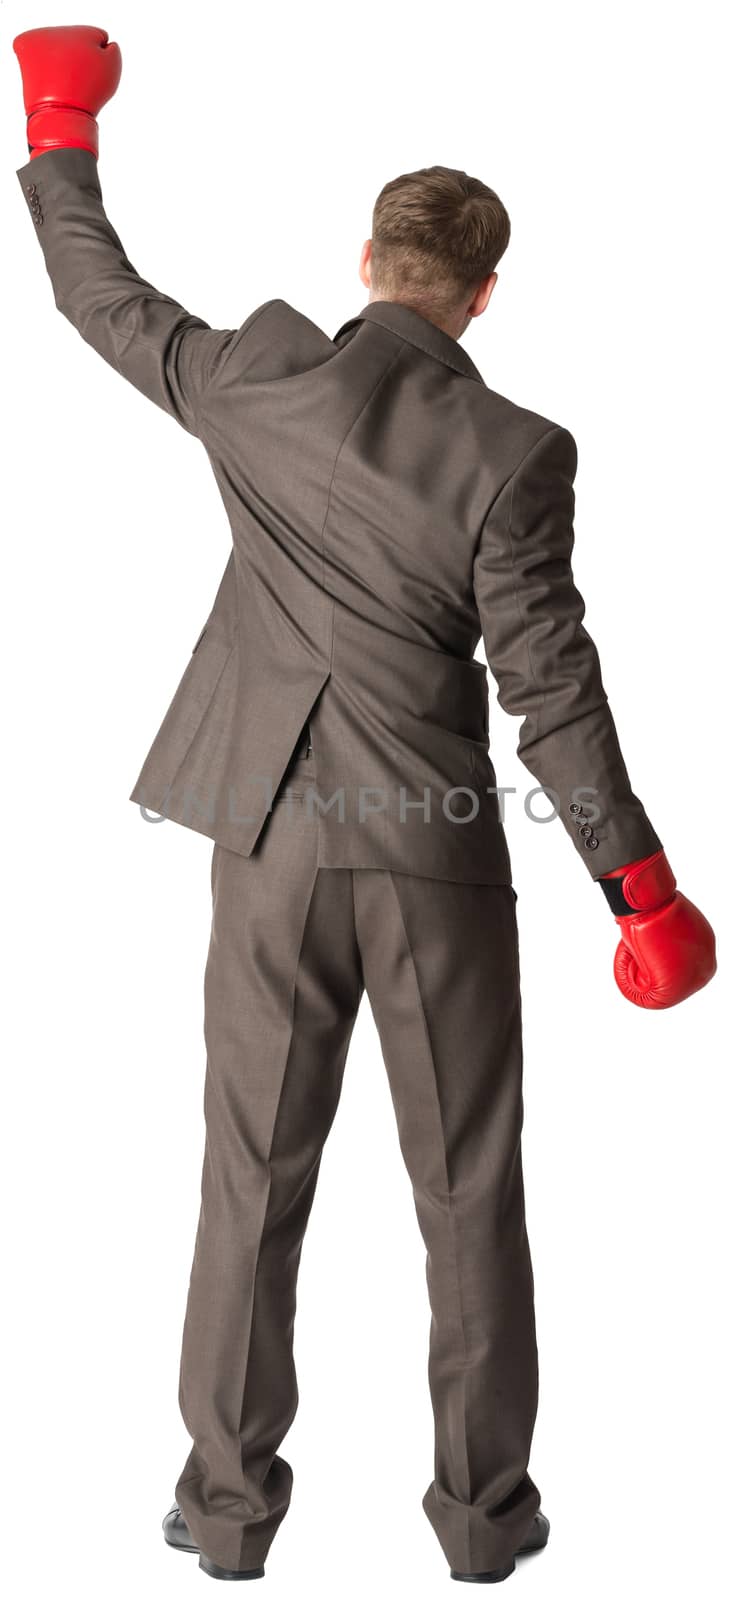 Businessman with boxing gloves, rear view. Isolated on white background